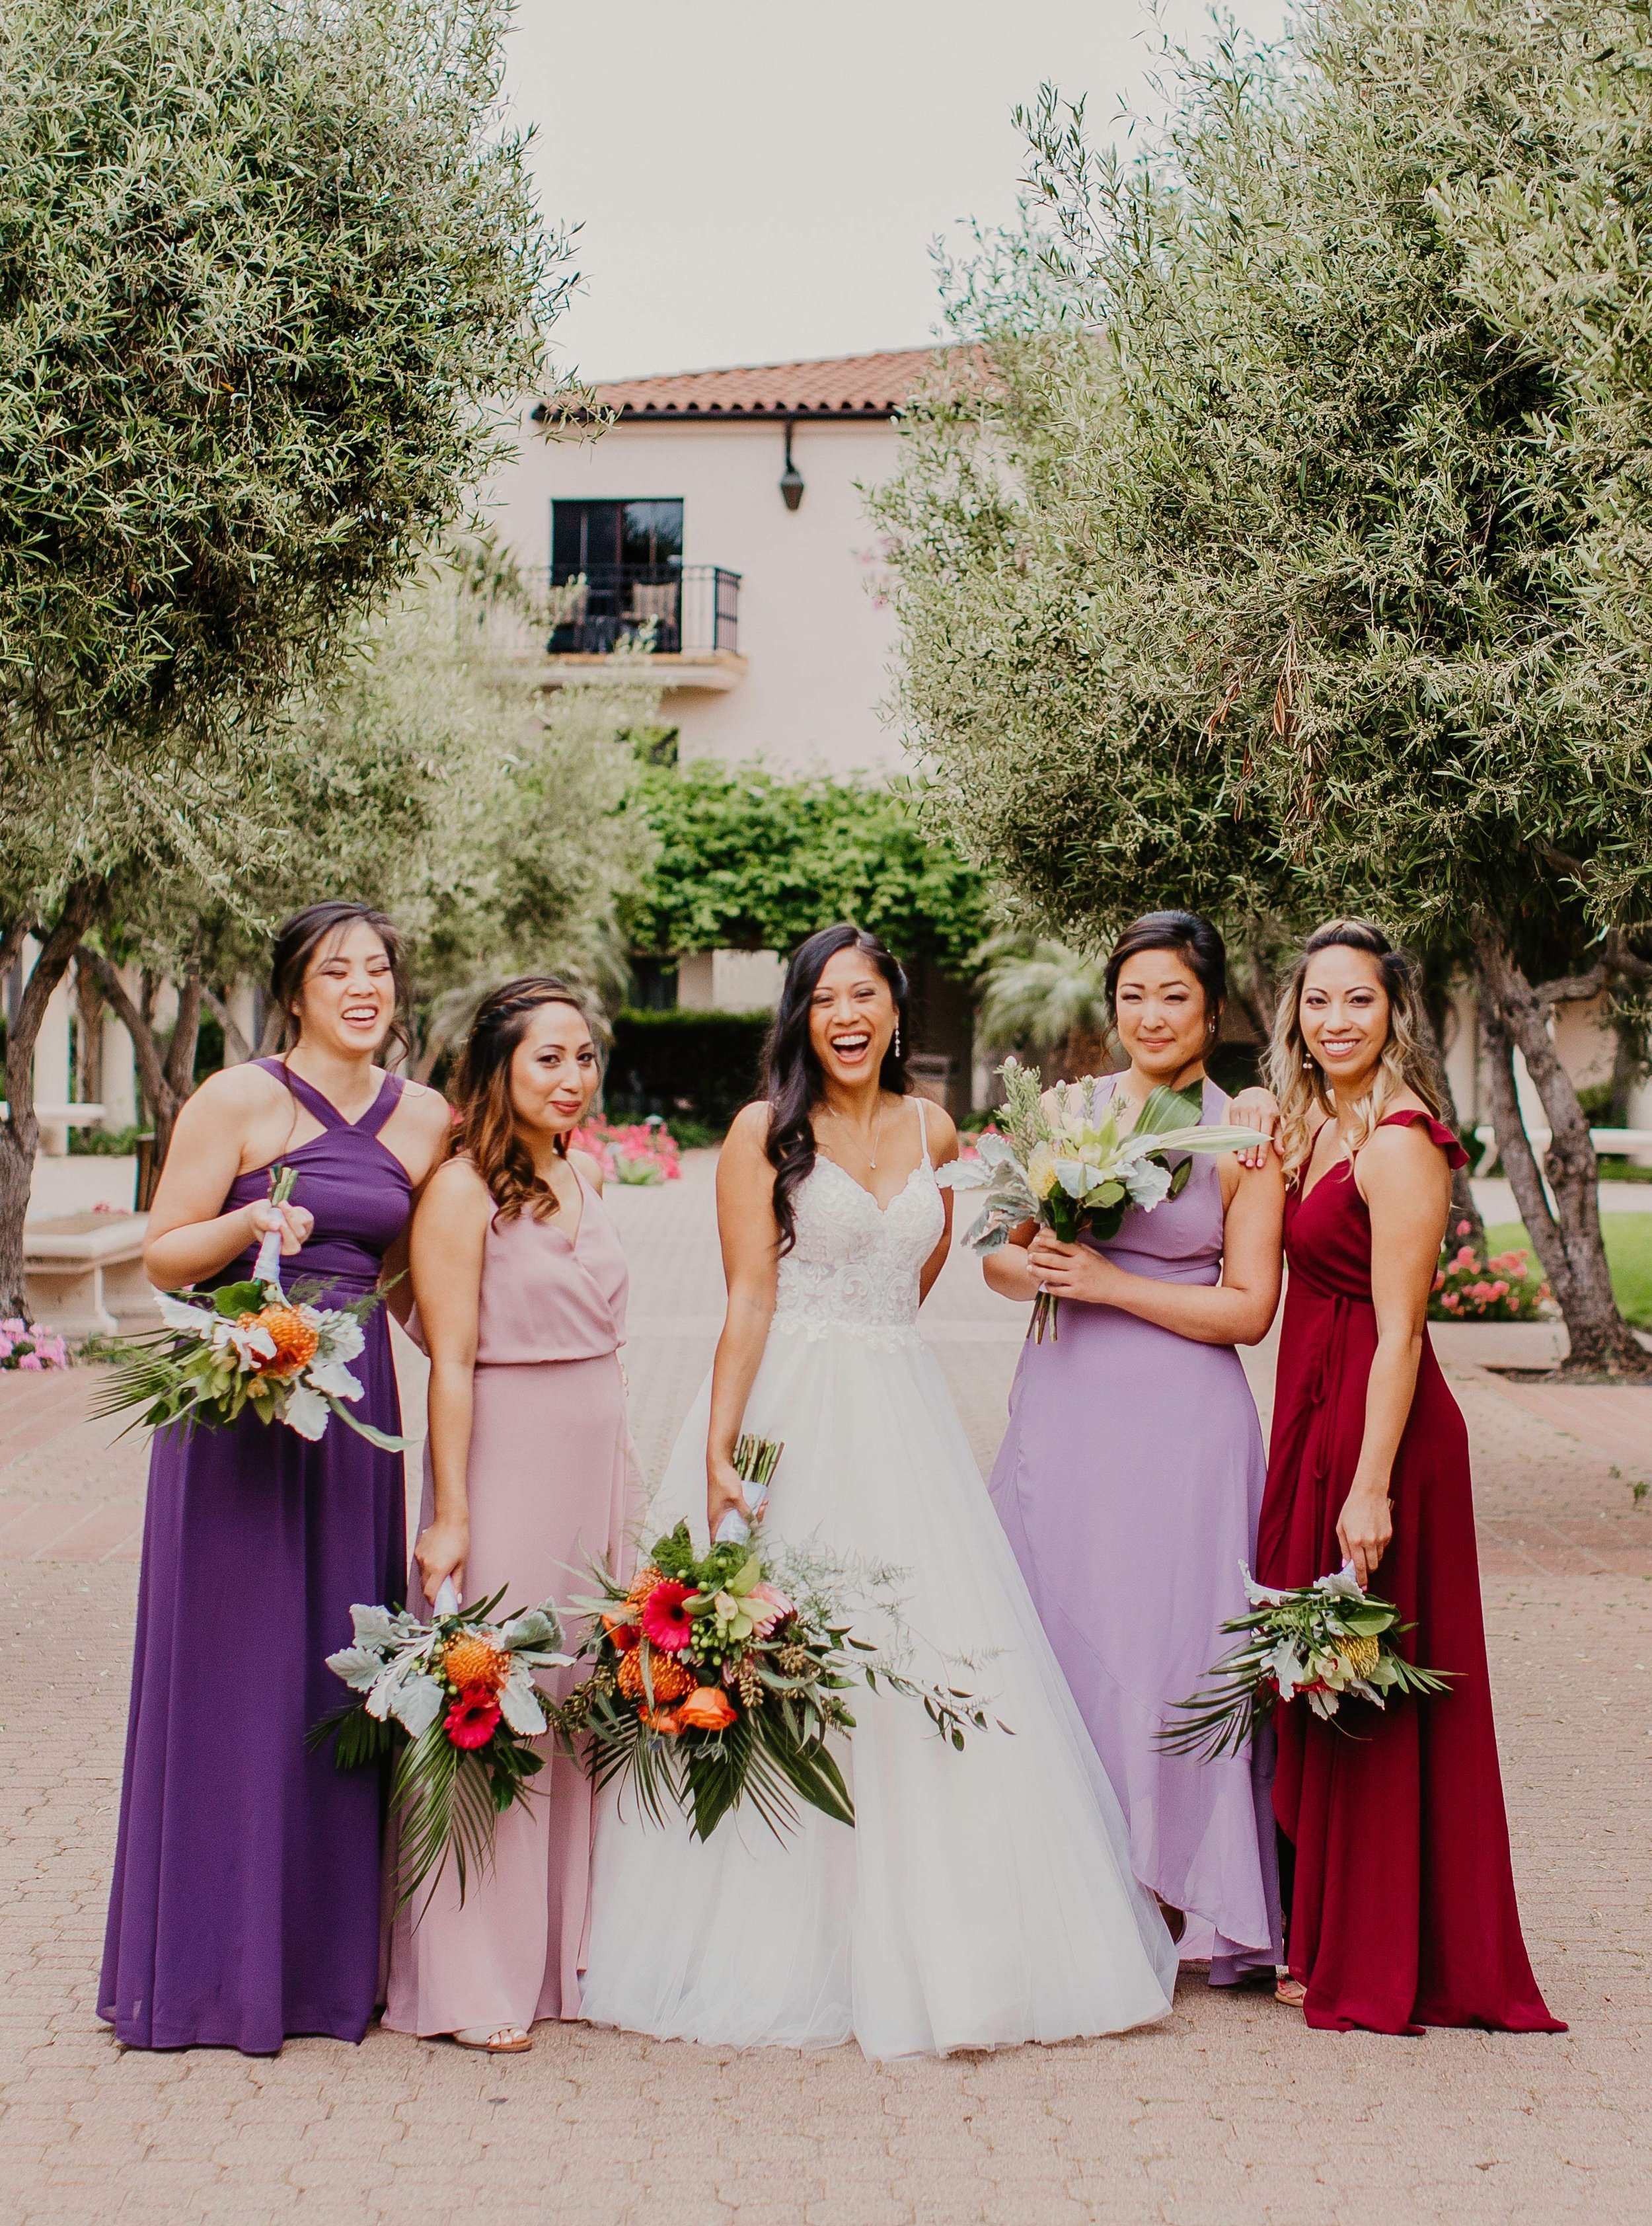 www.santabarbarawedding.com | Candice Marie Photography | Hilton Santa Barbara Beachfront Resort | Once in a Lifetime Weddings | Alpha Floral | Absolutely Fabulous Glamour | Bride and Bridesmaids